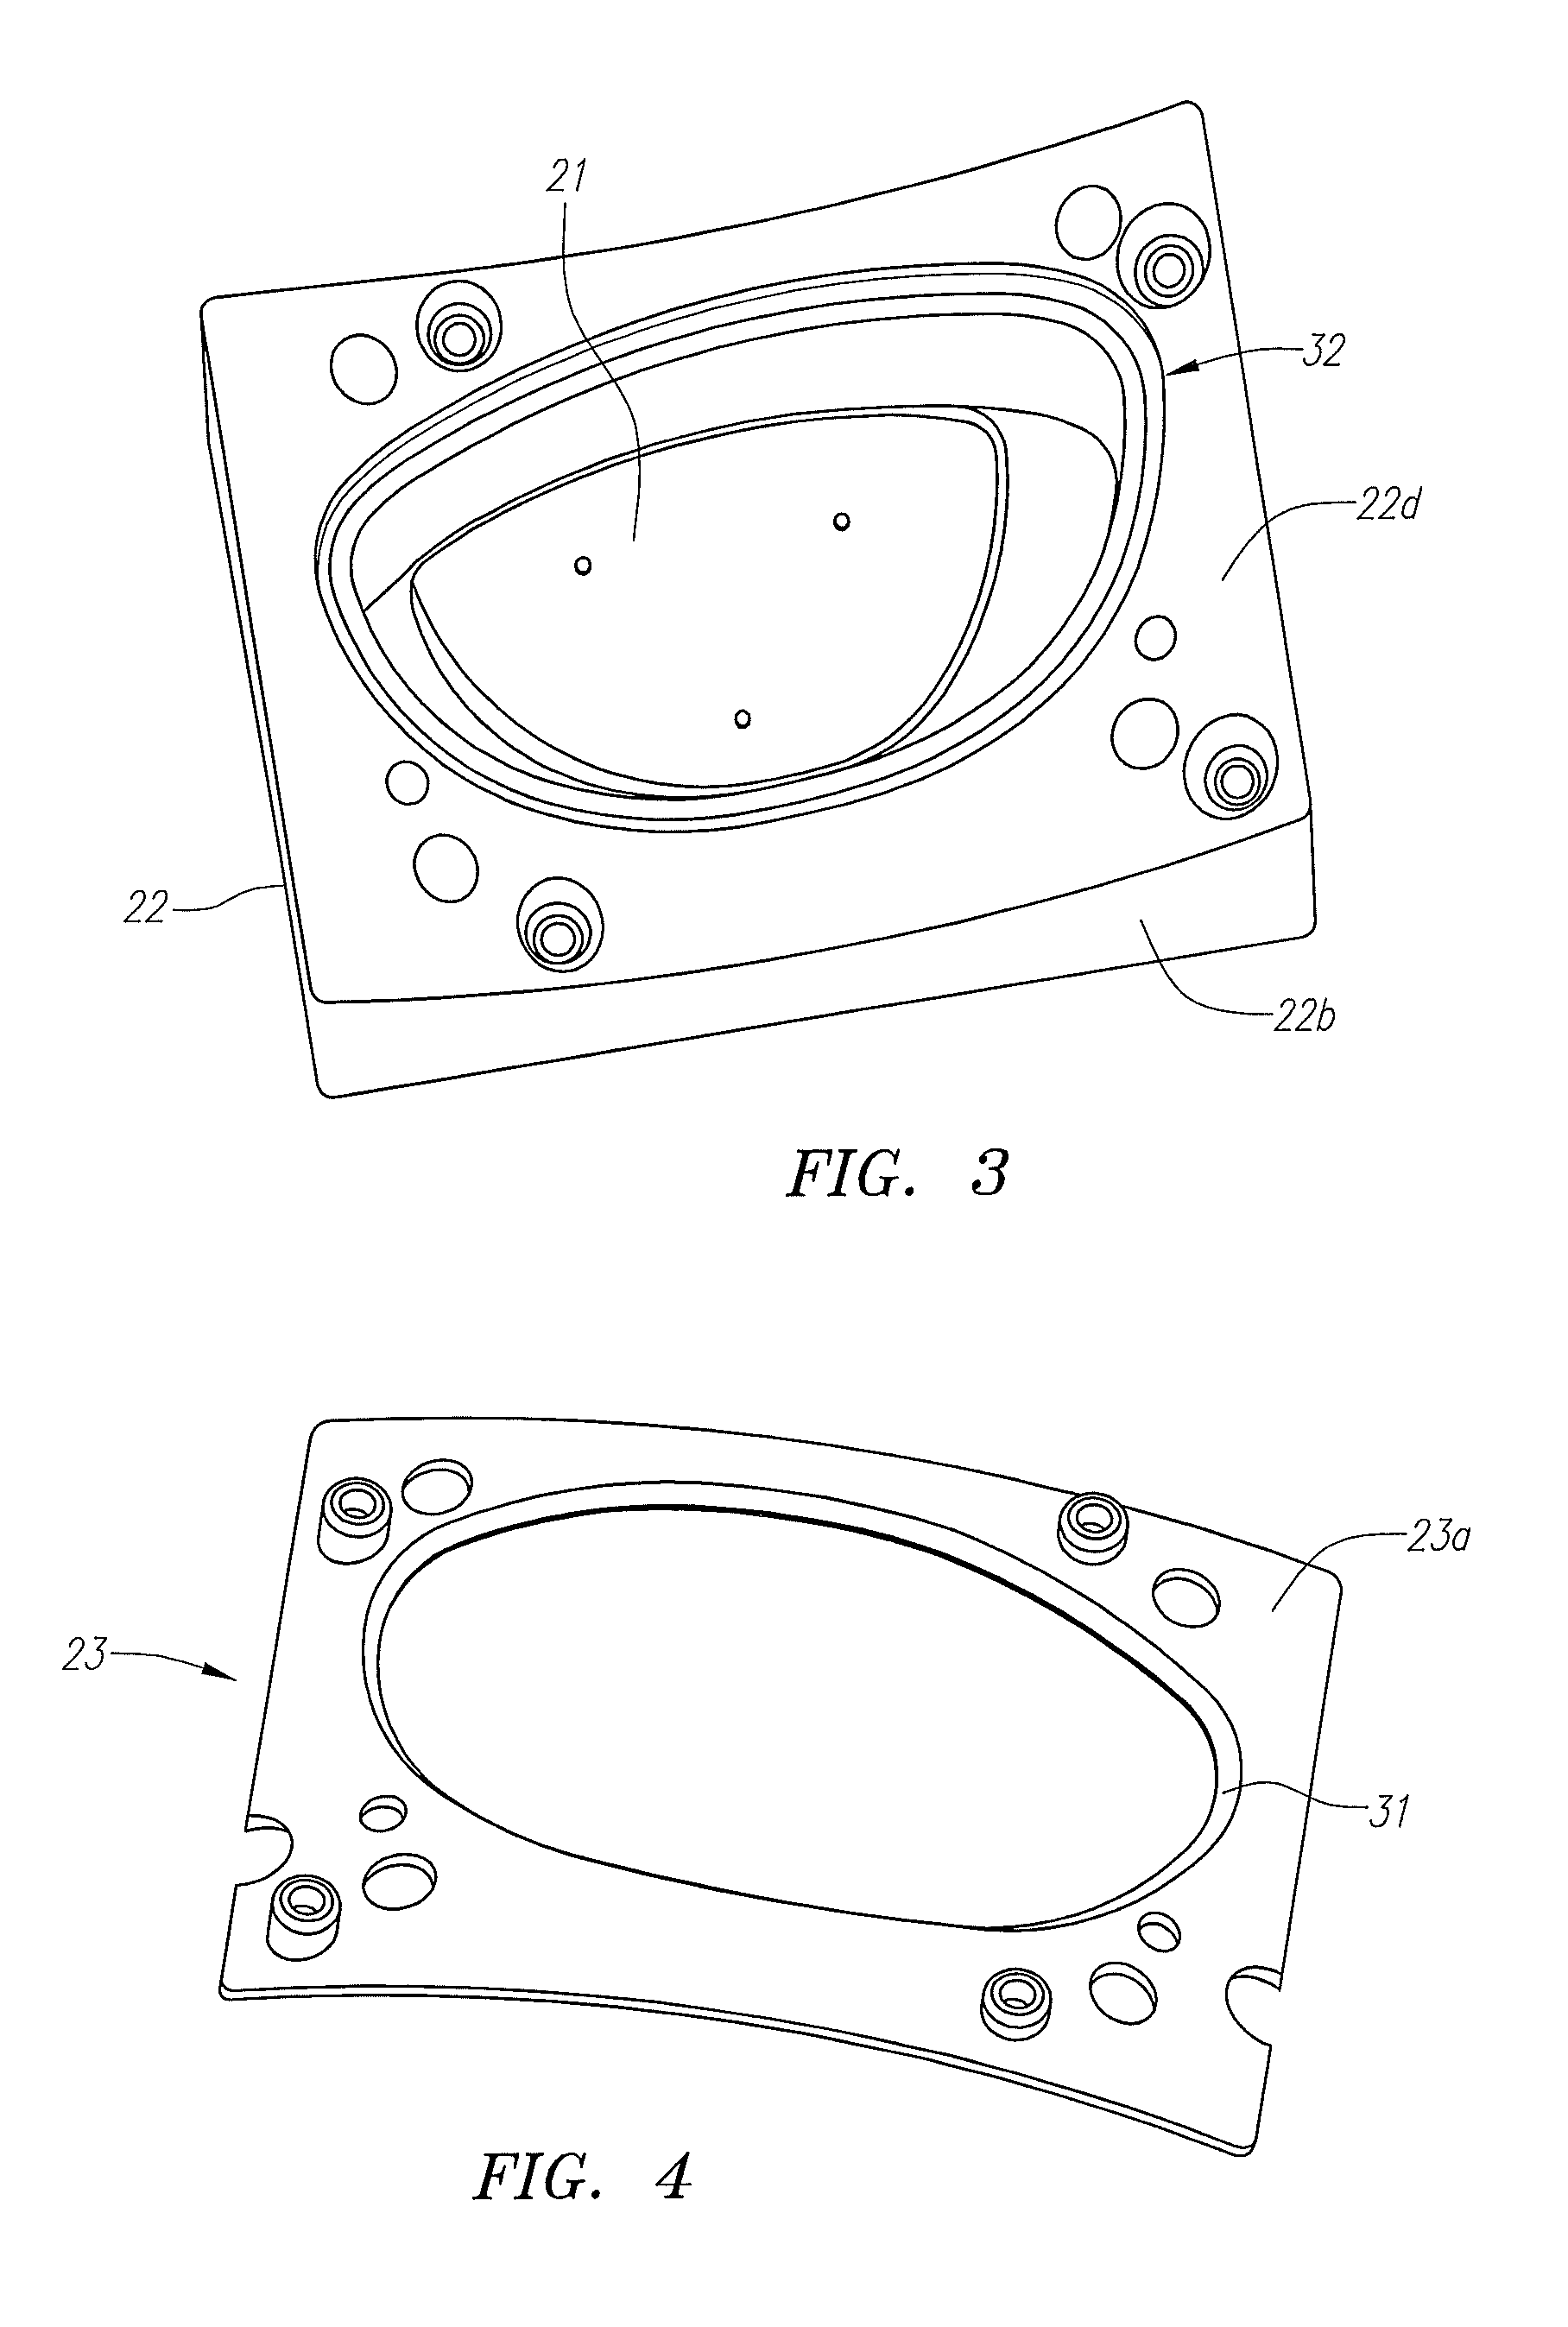 Apparatus and method for manufacturing a multiple material golf club head